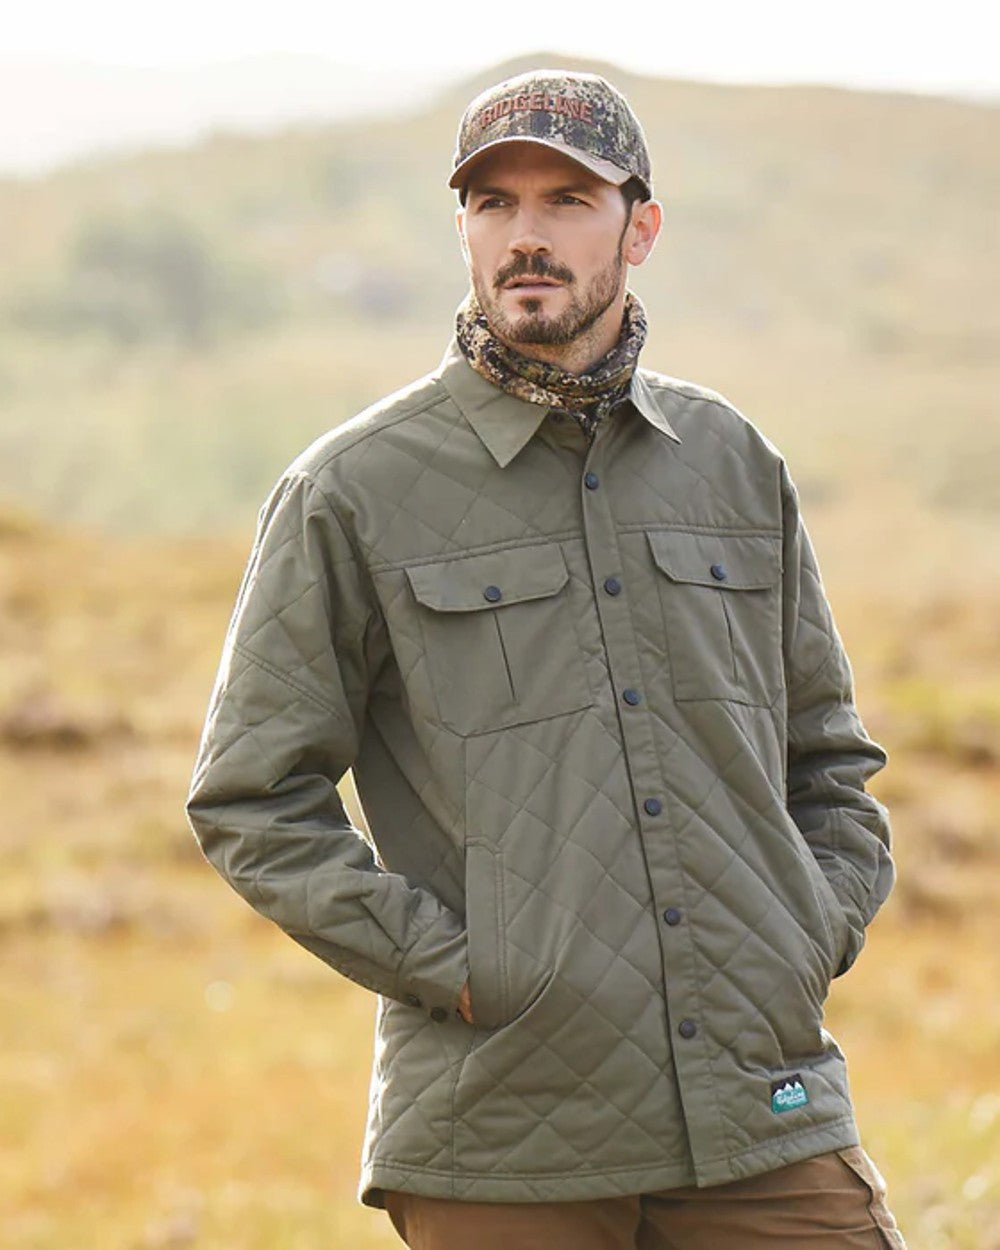 Ridgeline Mens Quilted Bramble Shirt in Olive Drab